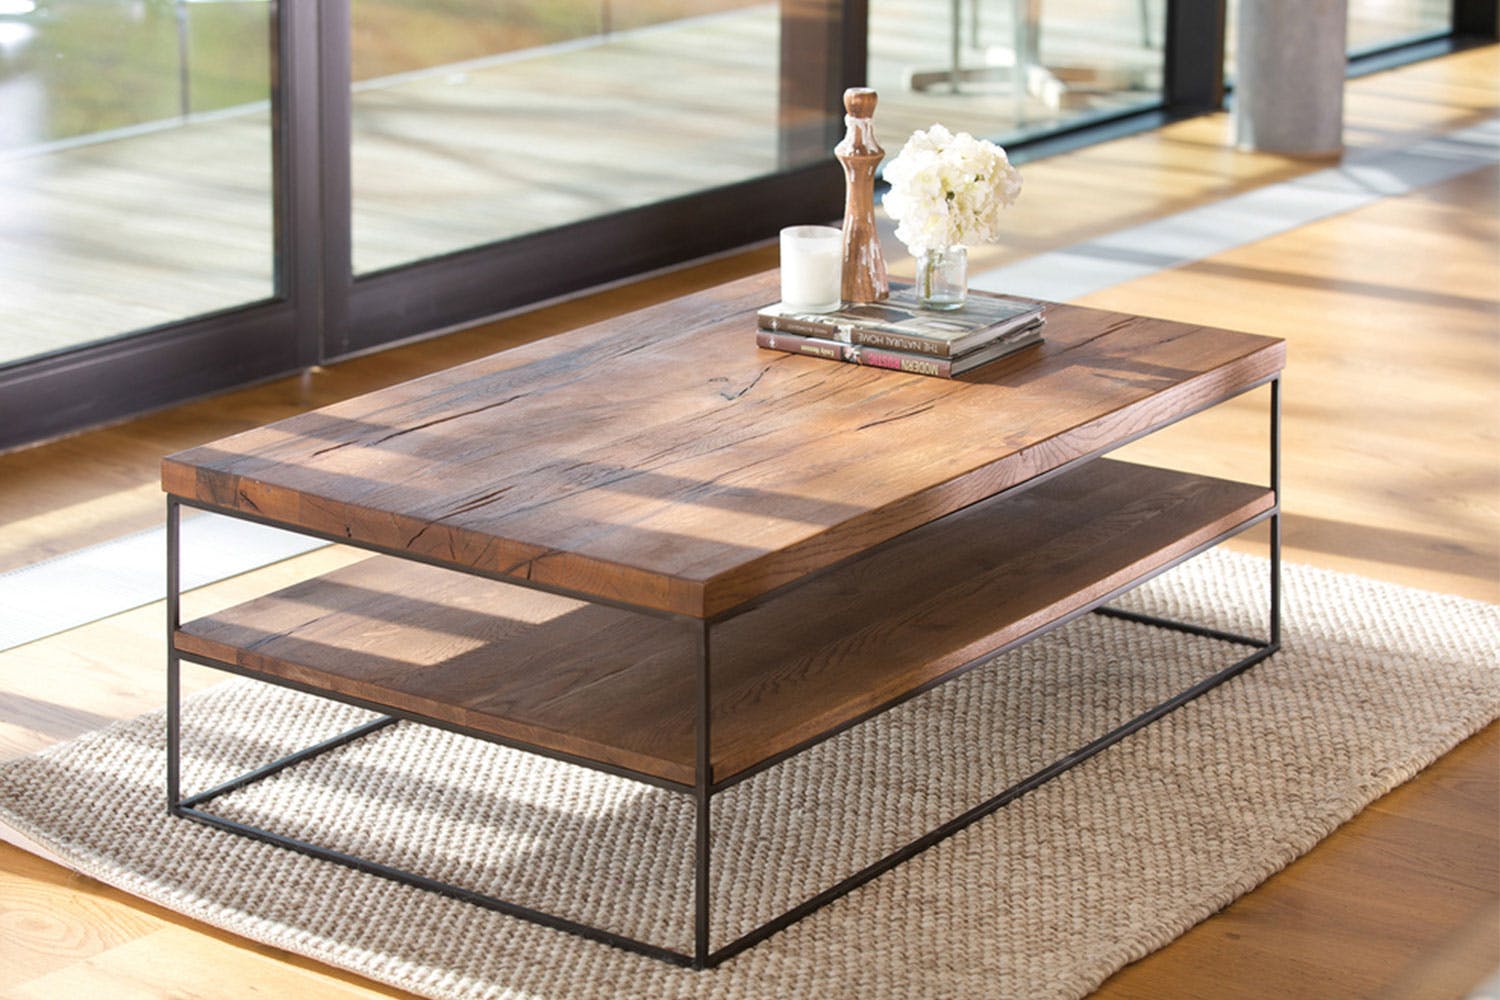 Top 10 Brands to Buy Coffee Tables Online & Instore